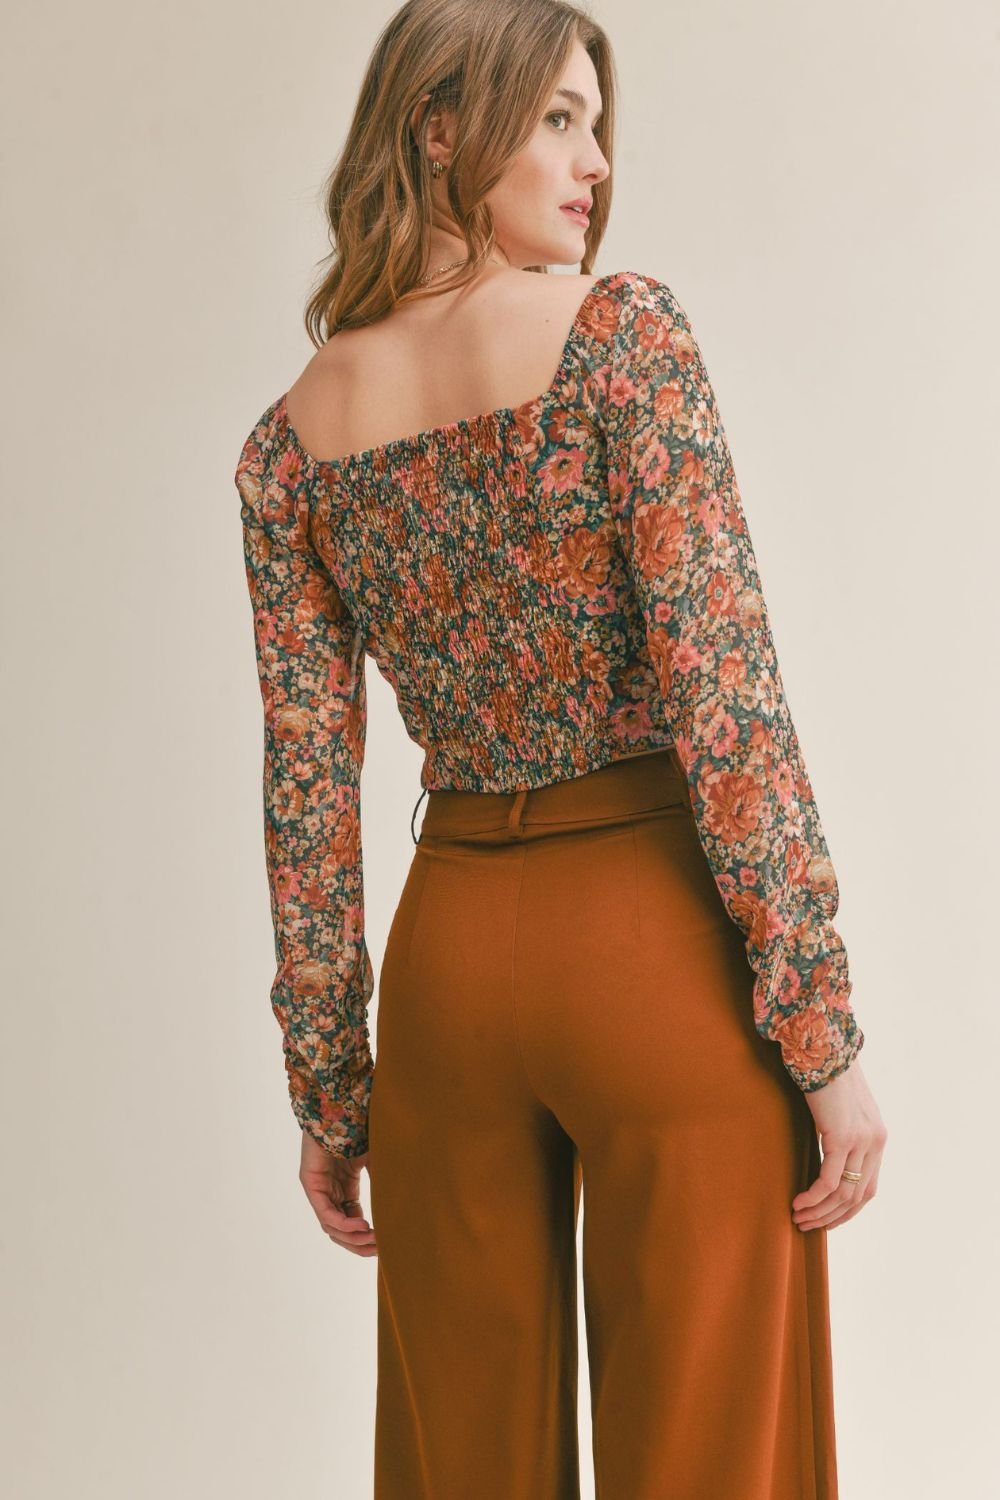 H&M Corset Top with Puff Sleeves Orange Size XXS - $16 (11% Off